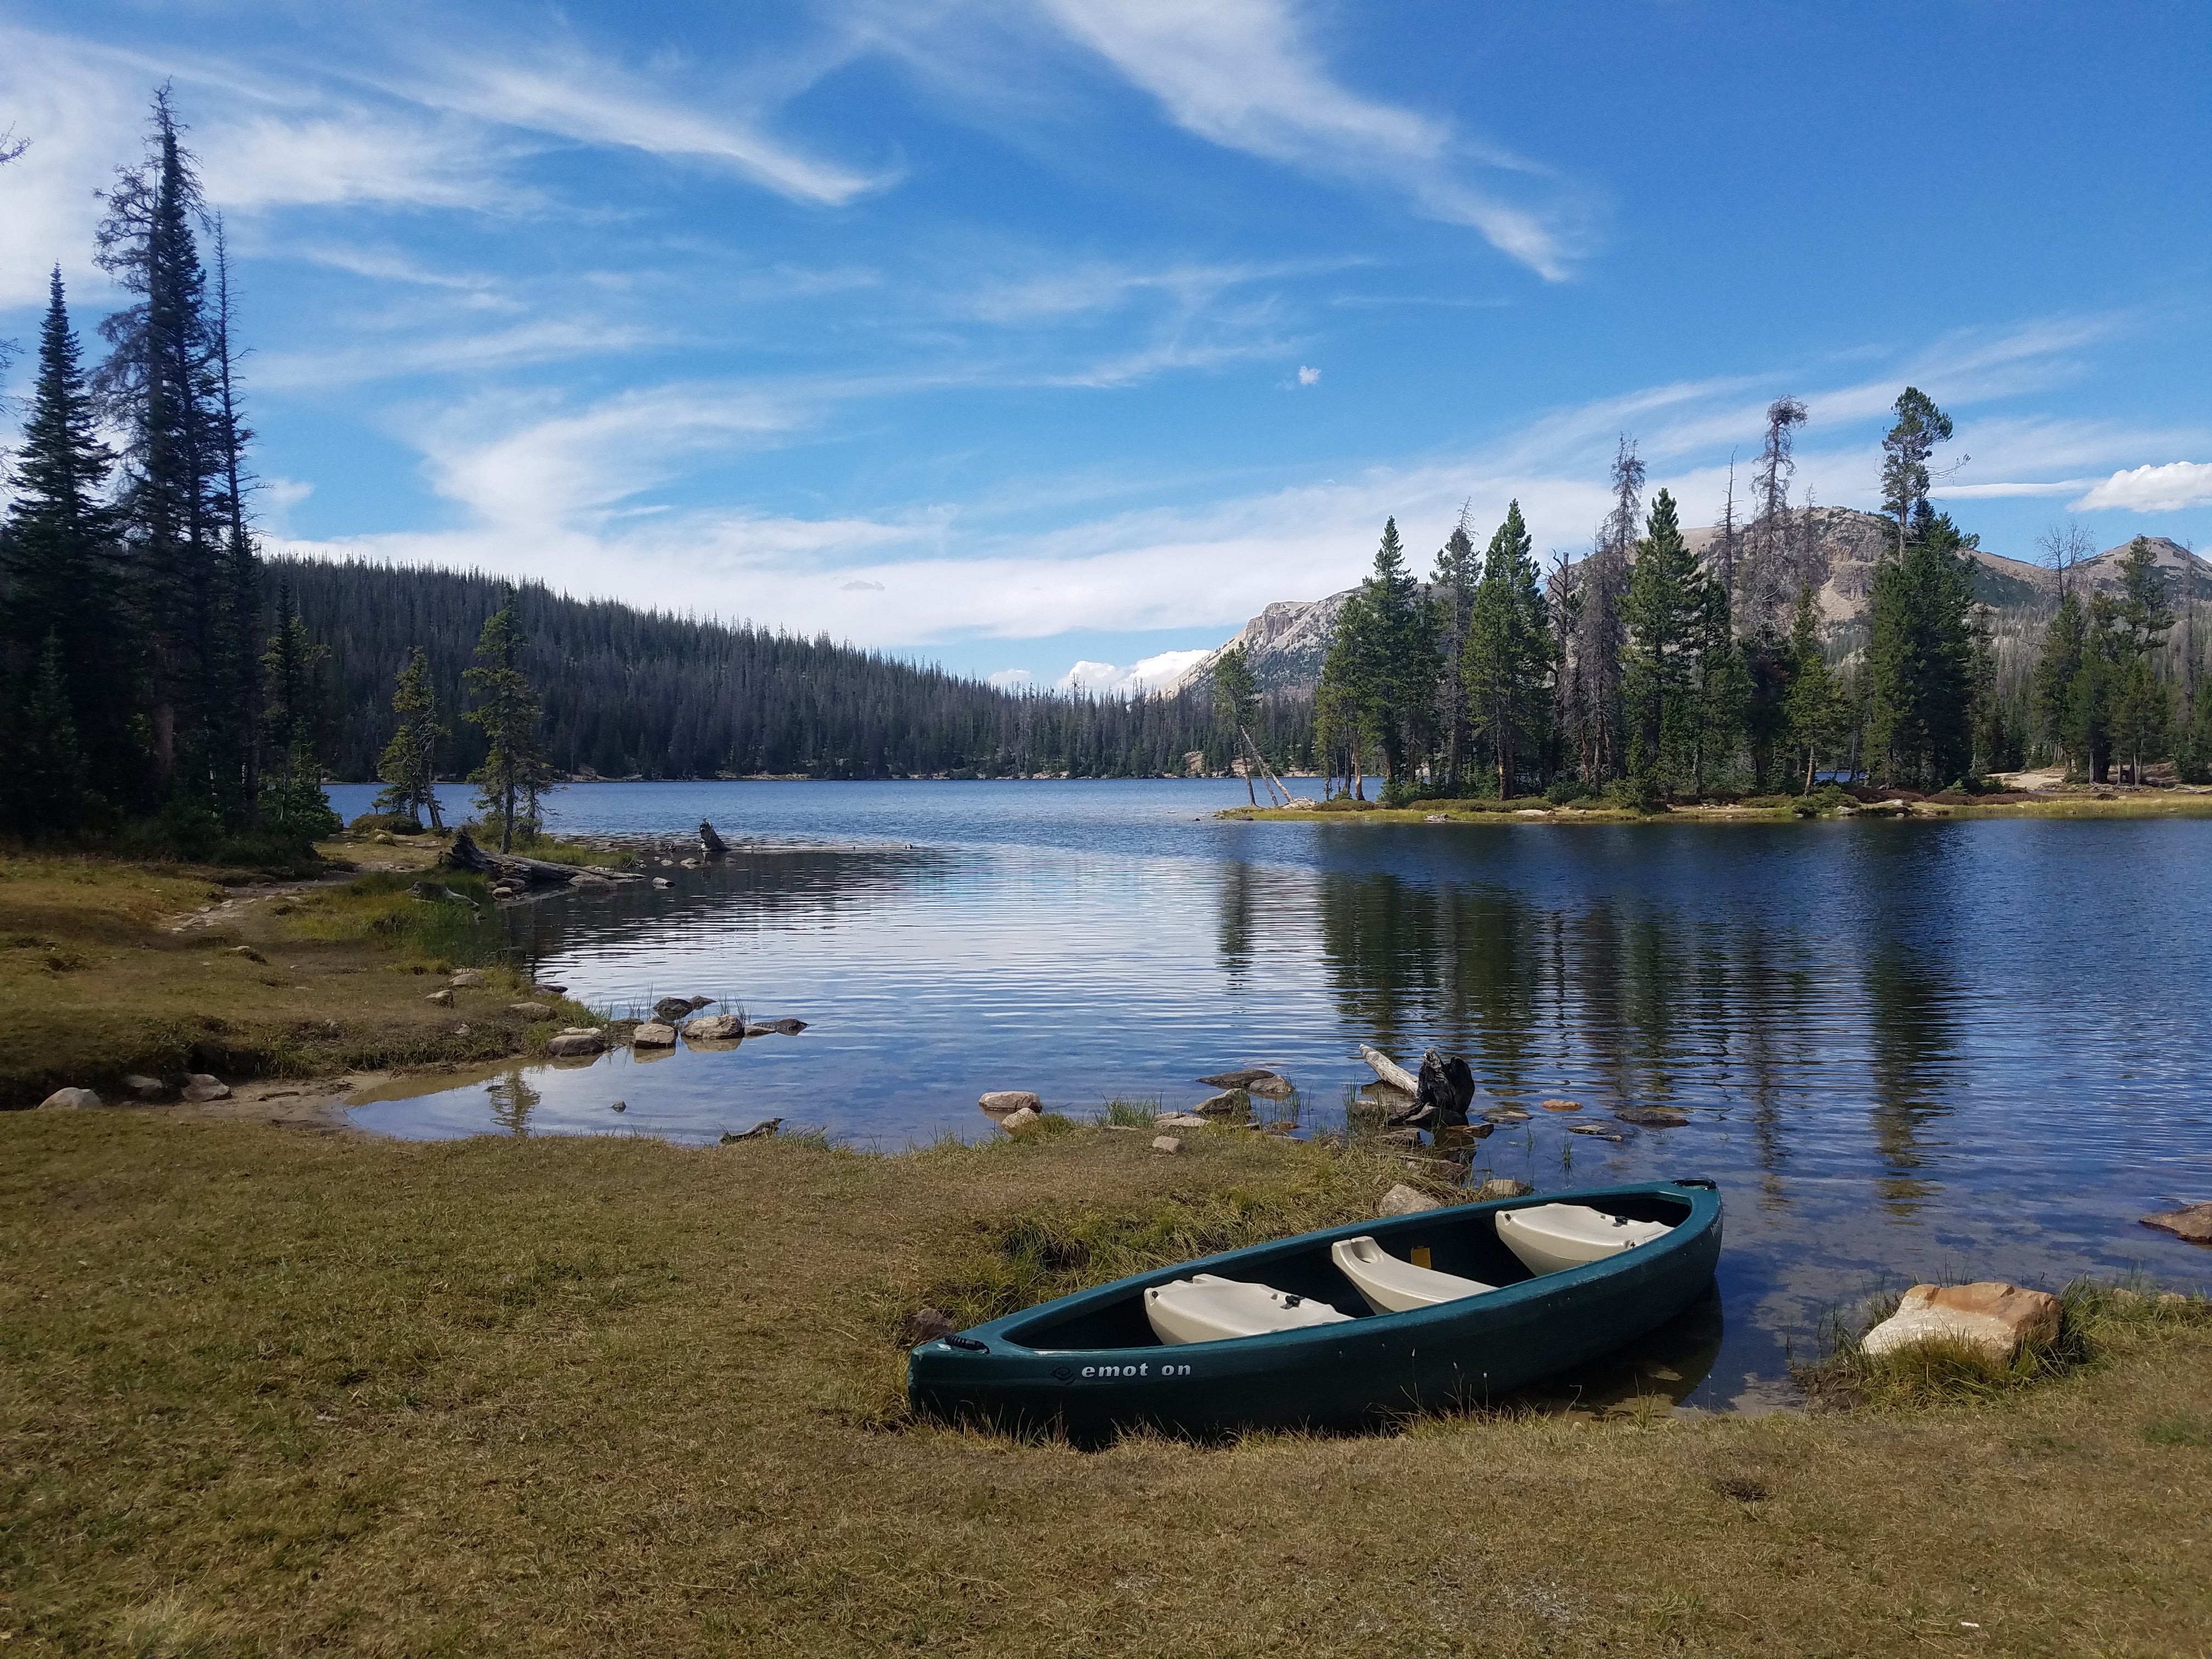 Camper submitted image from Mirror Lake - 5